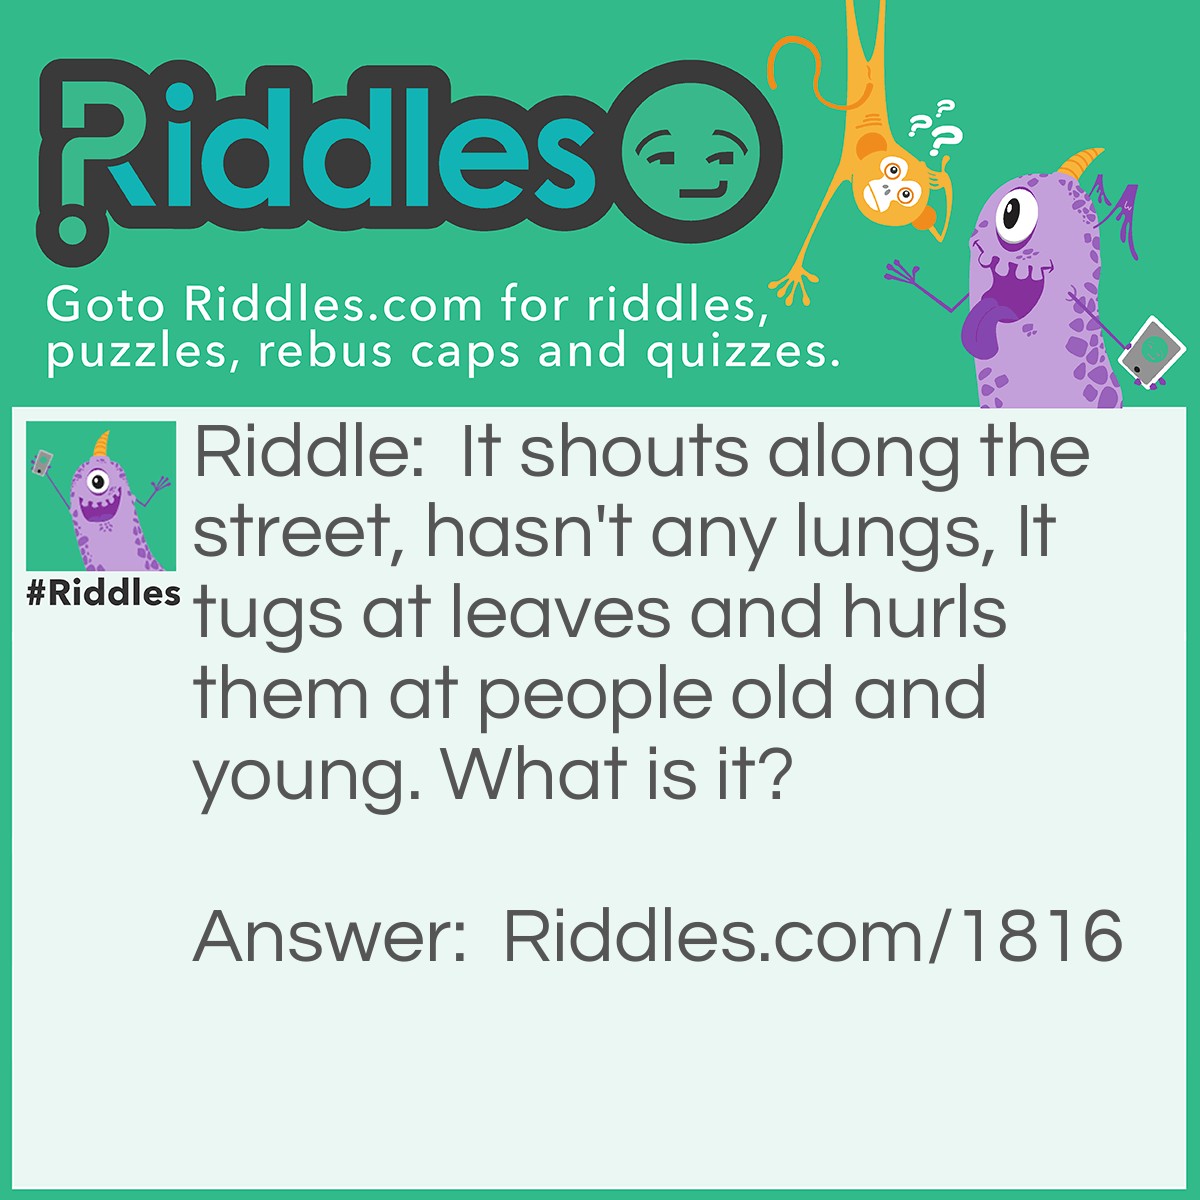 Riddle: It shouts along the street, hasn't any lungs, It tugs at leaves and hurls them at people old and young. What is it? Answer: The Wind.